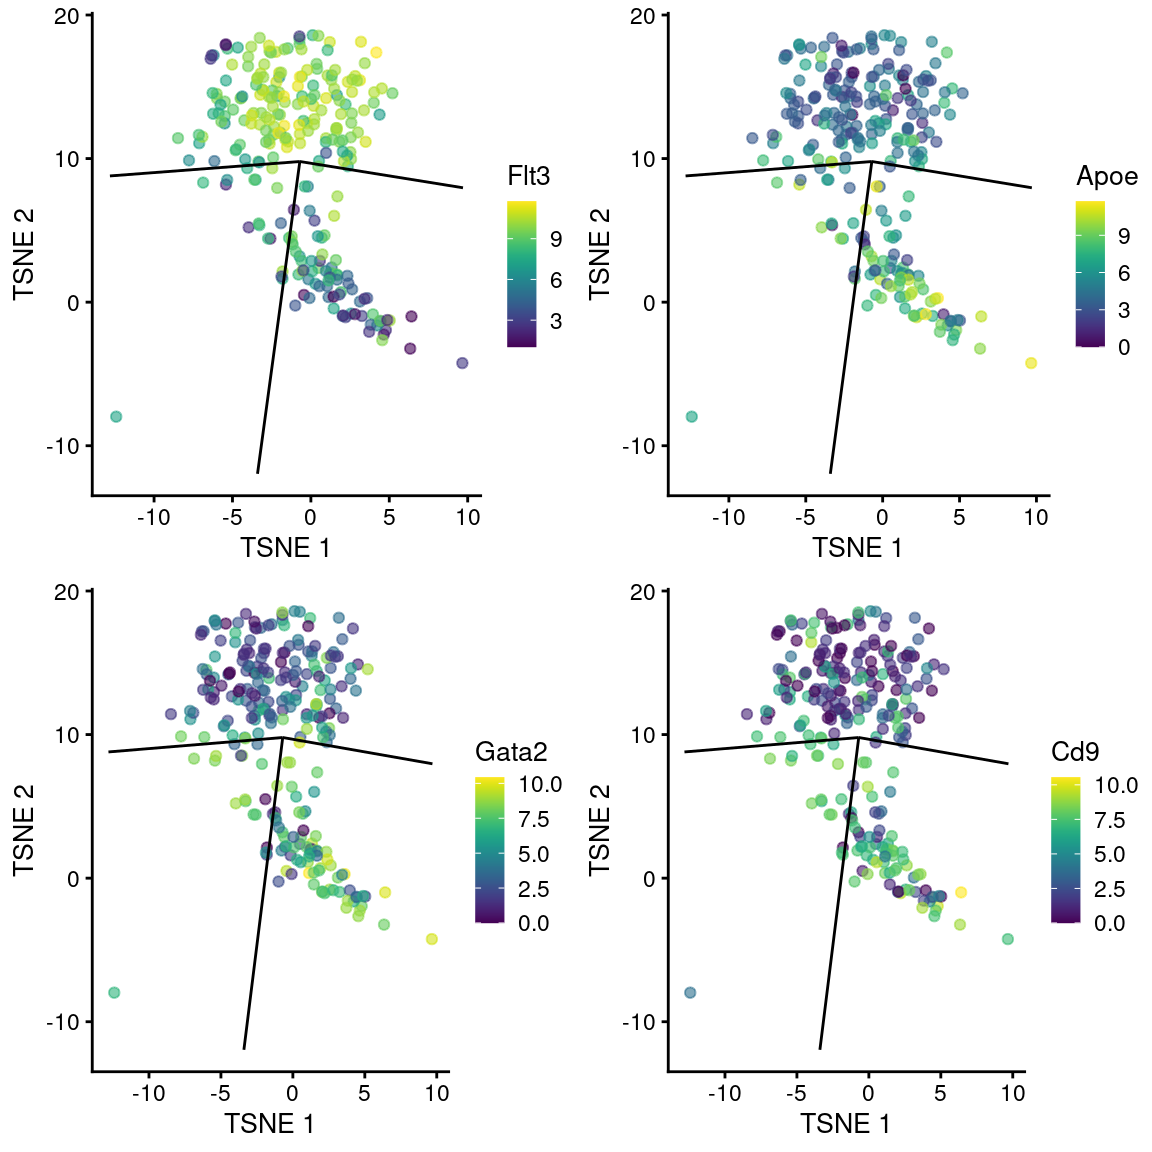 $t$-SNE plots of cells in the cluster containing the branch point of the MST in the Nestorowa dataset. Each point is a cell colored by the expression of a gene of interest and the relevant edges of the MST are overlaid on top.